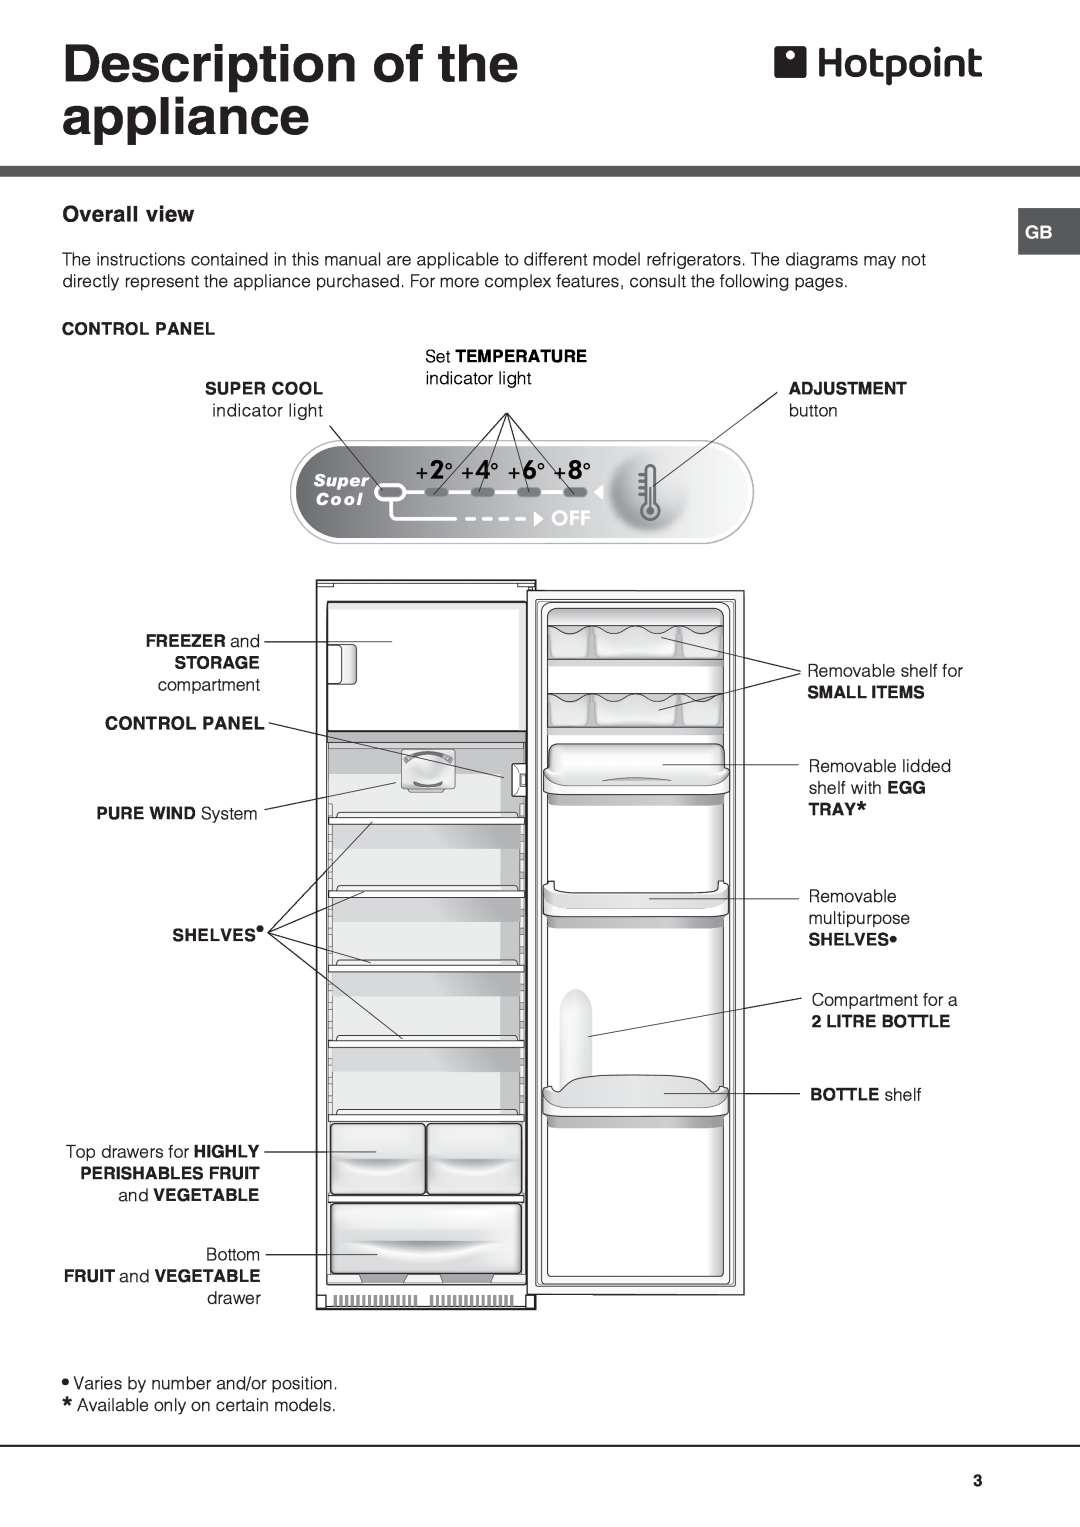 Hotpoint HSZ3021VL, Refrigerator operating instructions Description of the appliance, Overall view 